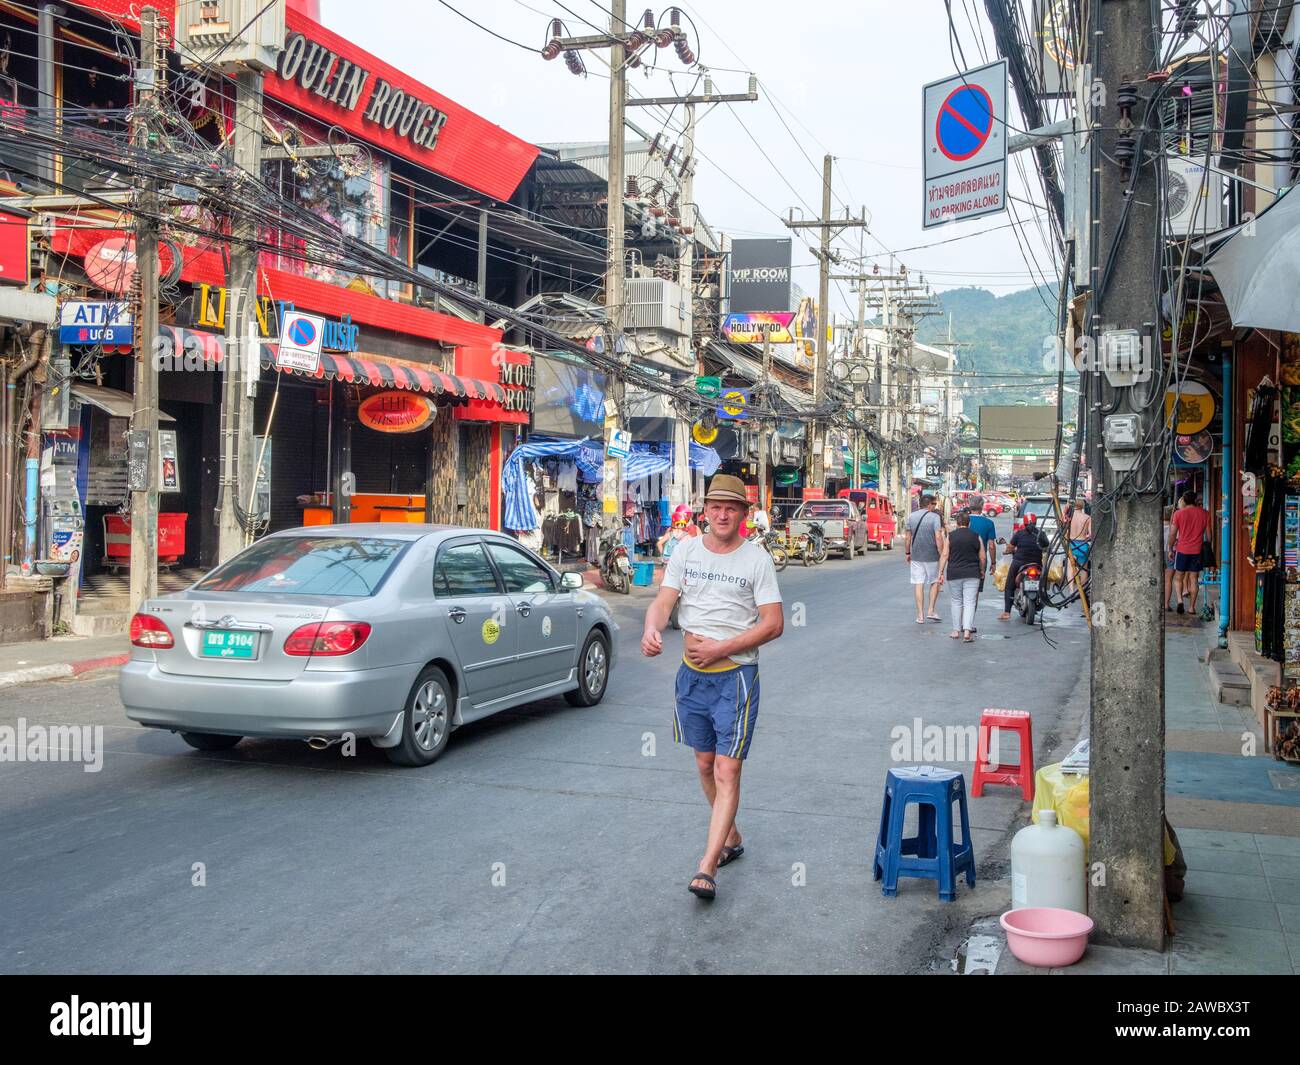 Bangla Road in Patong. This street becomes a bustling walking street at night in Patong, which is one of the busiest parts of Phuket. Stock Photo